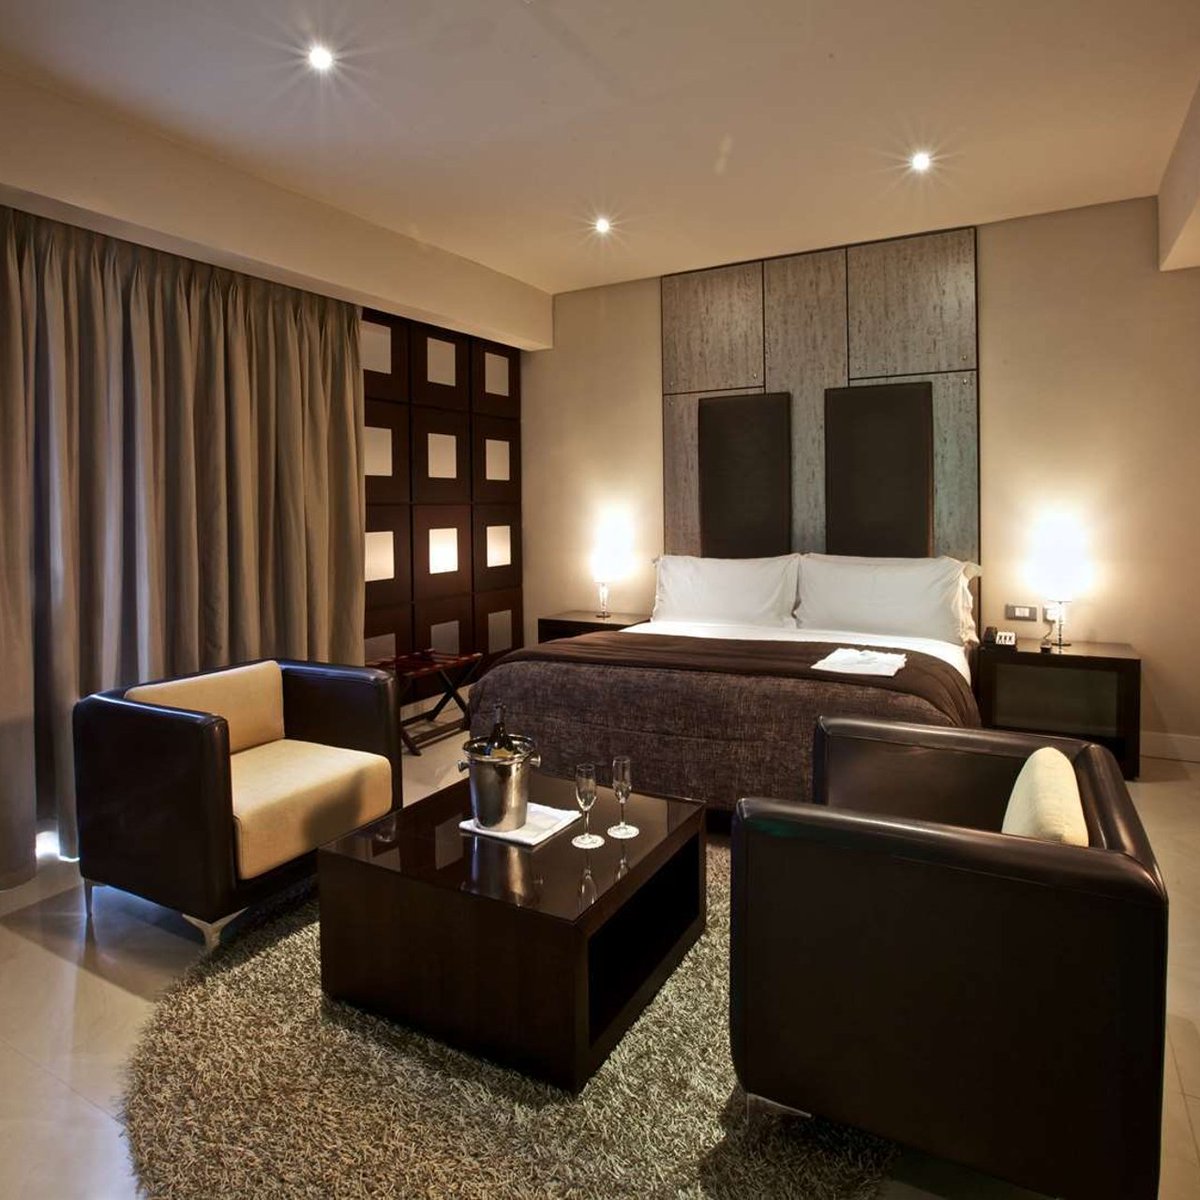 The Wheatbaker, Lagos – N441,530 per nightThe Wheatbaker is a luxurious boutique hotel,which is situated close to the Lagos business districts of lkoyi and Victoria Island, what makes it a perfect place for all kinds of travellers. The hotel stands 35 kilometres from MMI Airport